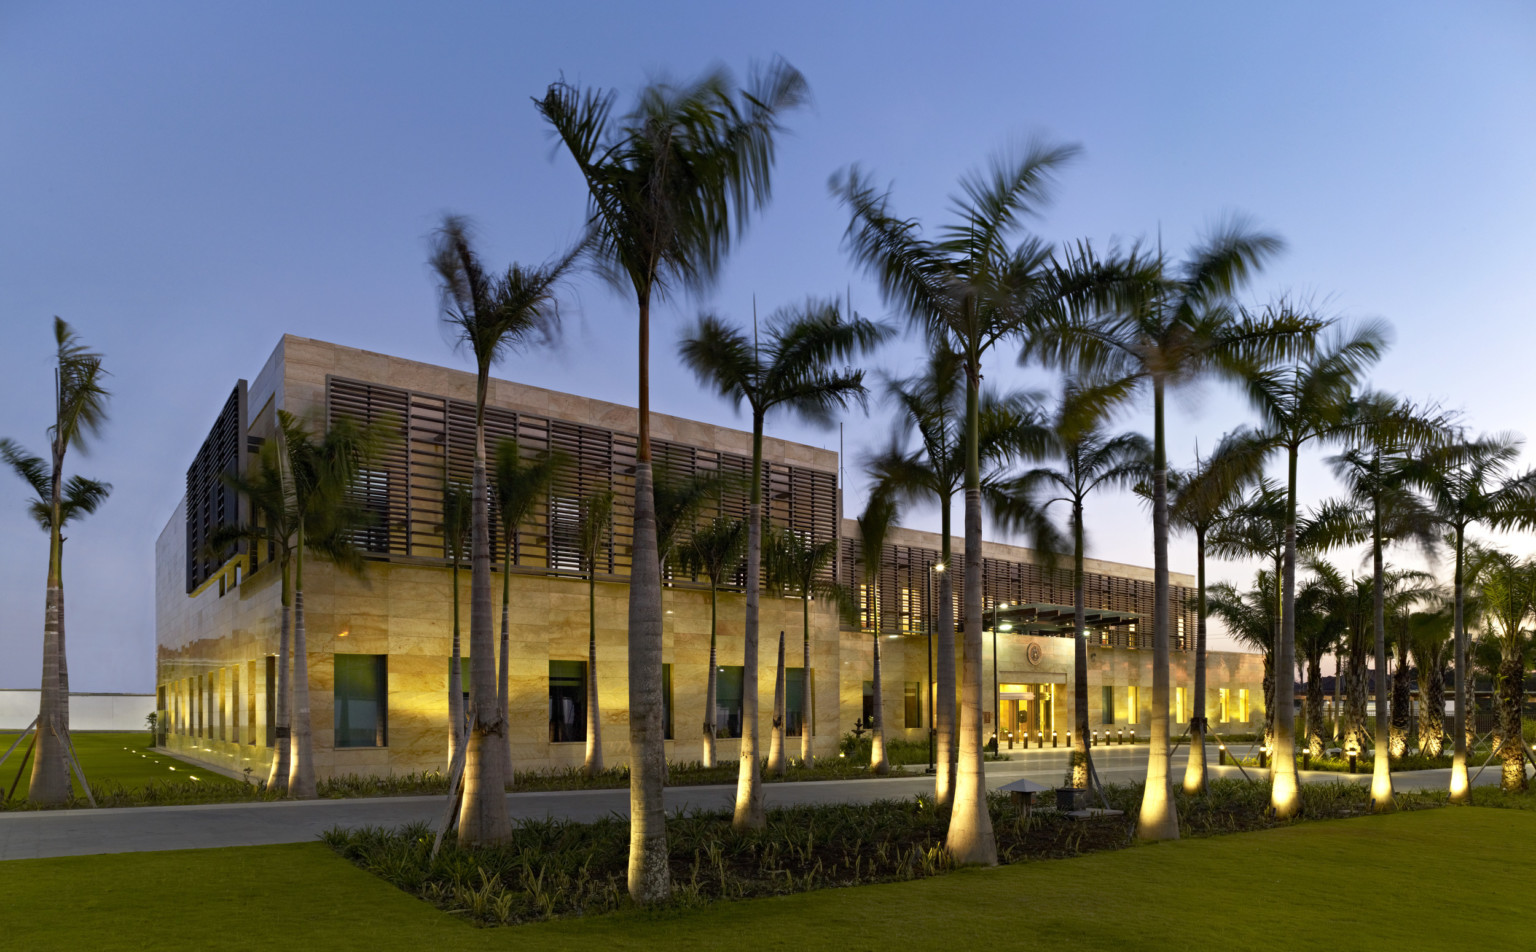 a stone building with brise soleil panels on second story windows. uplights illuminate ground floor, windows, and palm trees